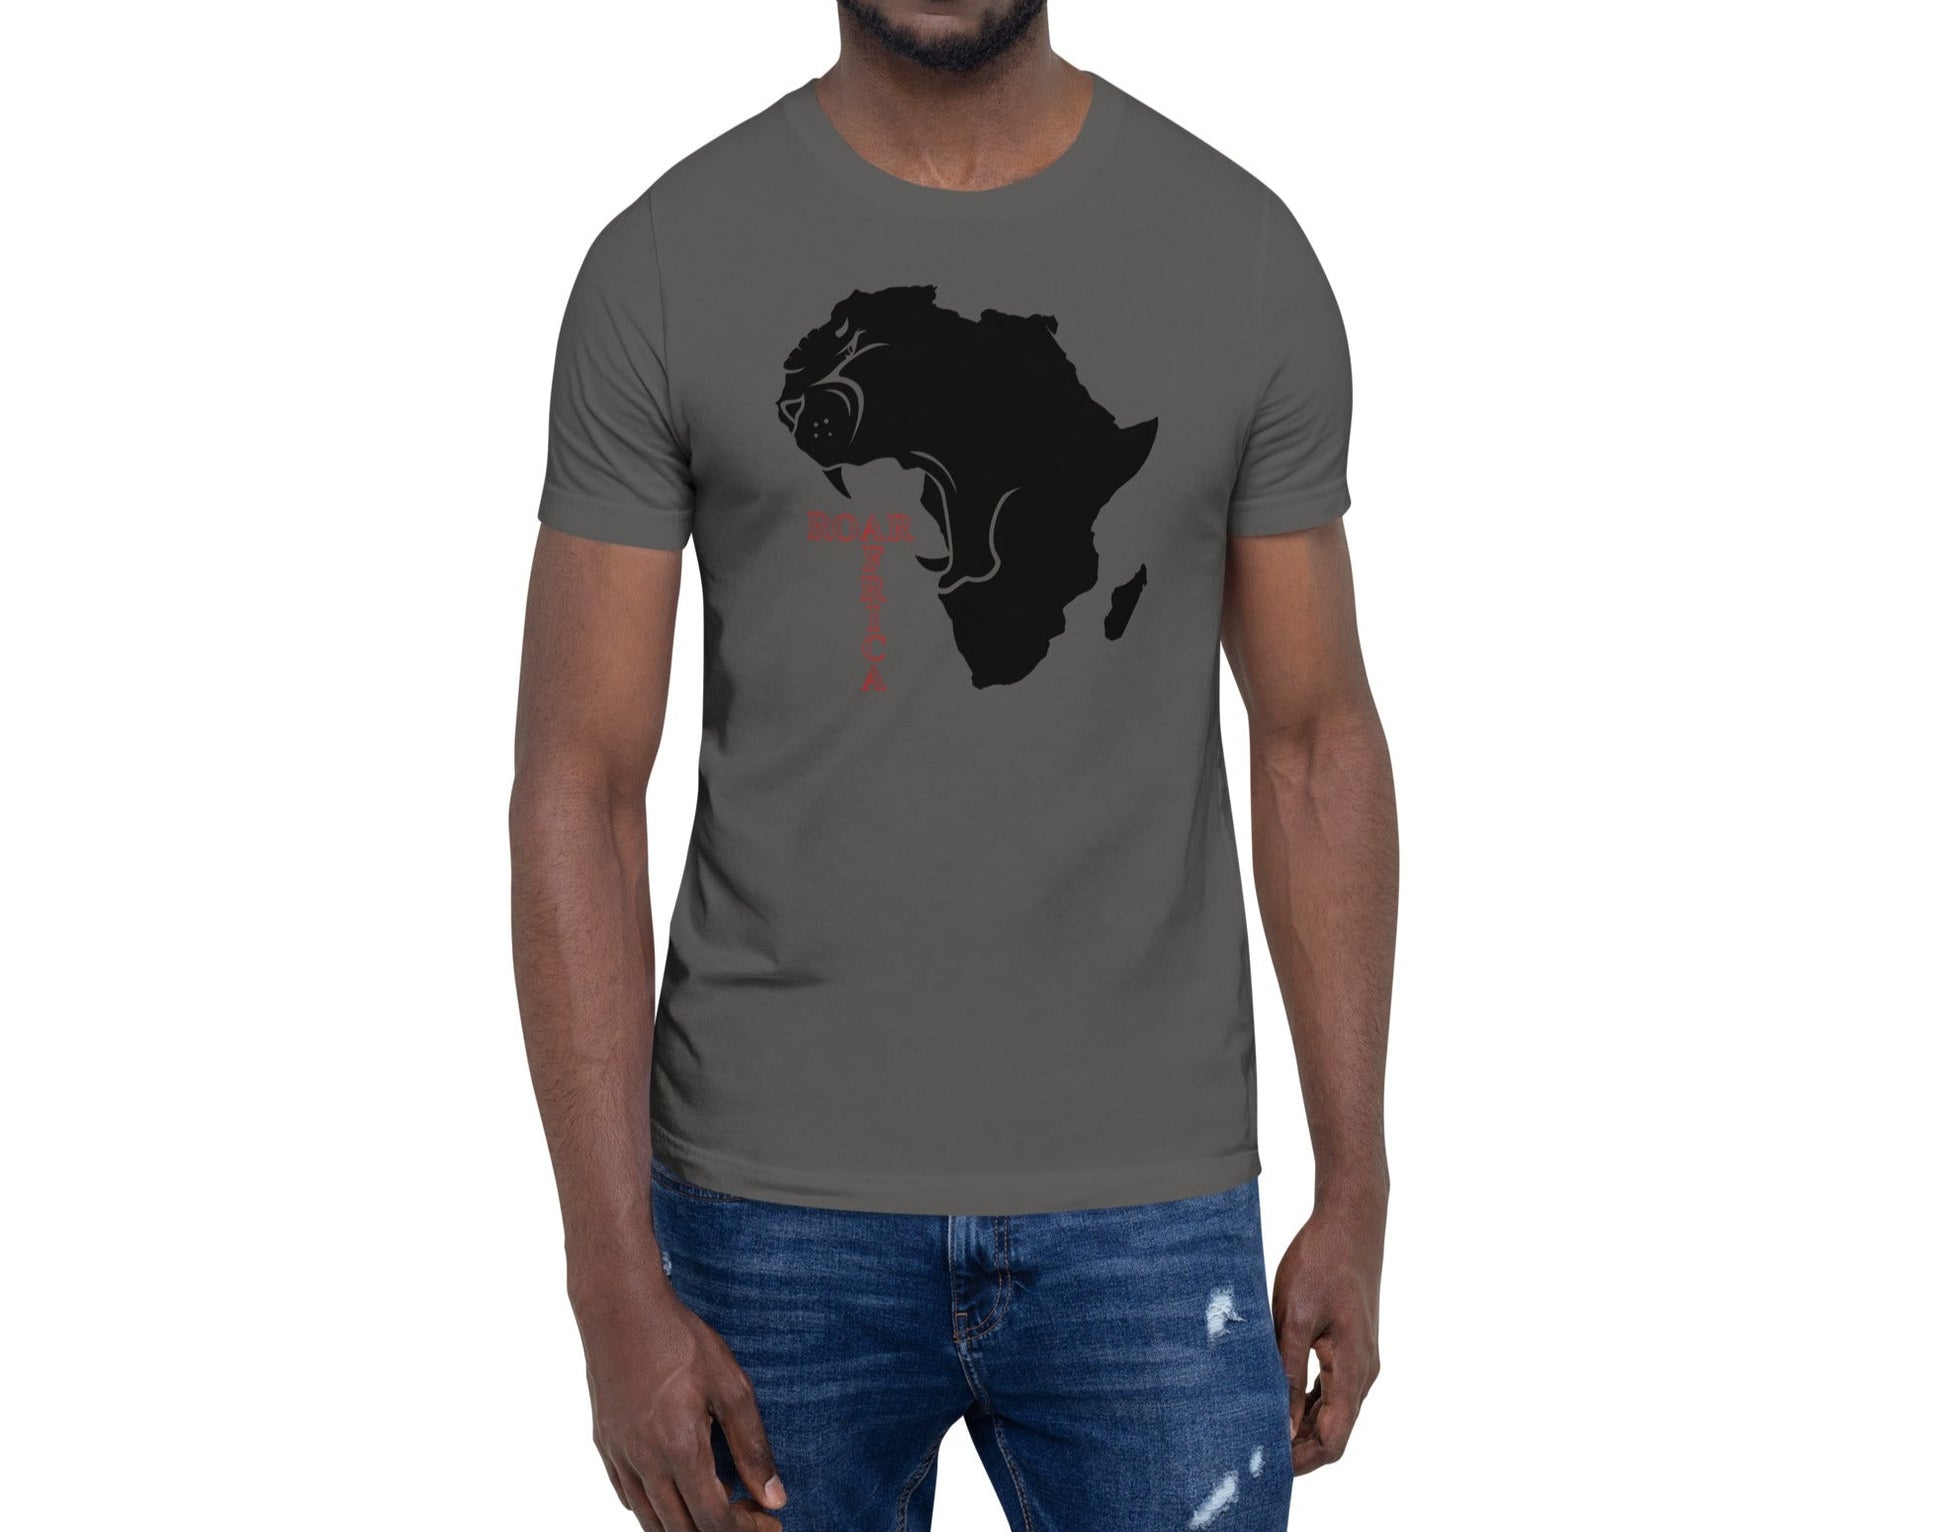 Unisex Africa Lion Map T-Shirt for Cultural Pride